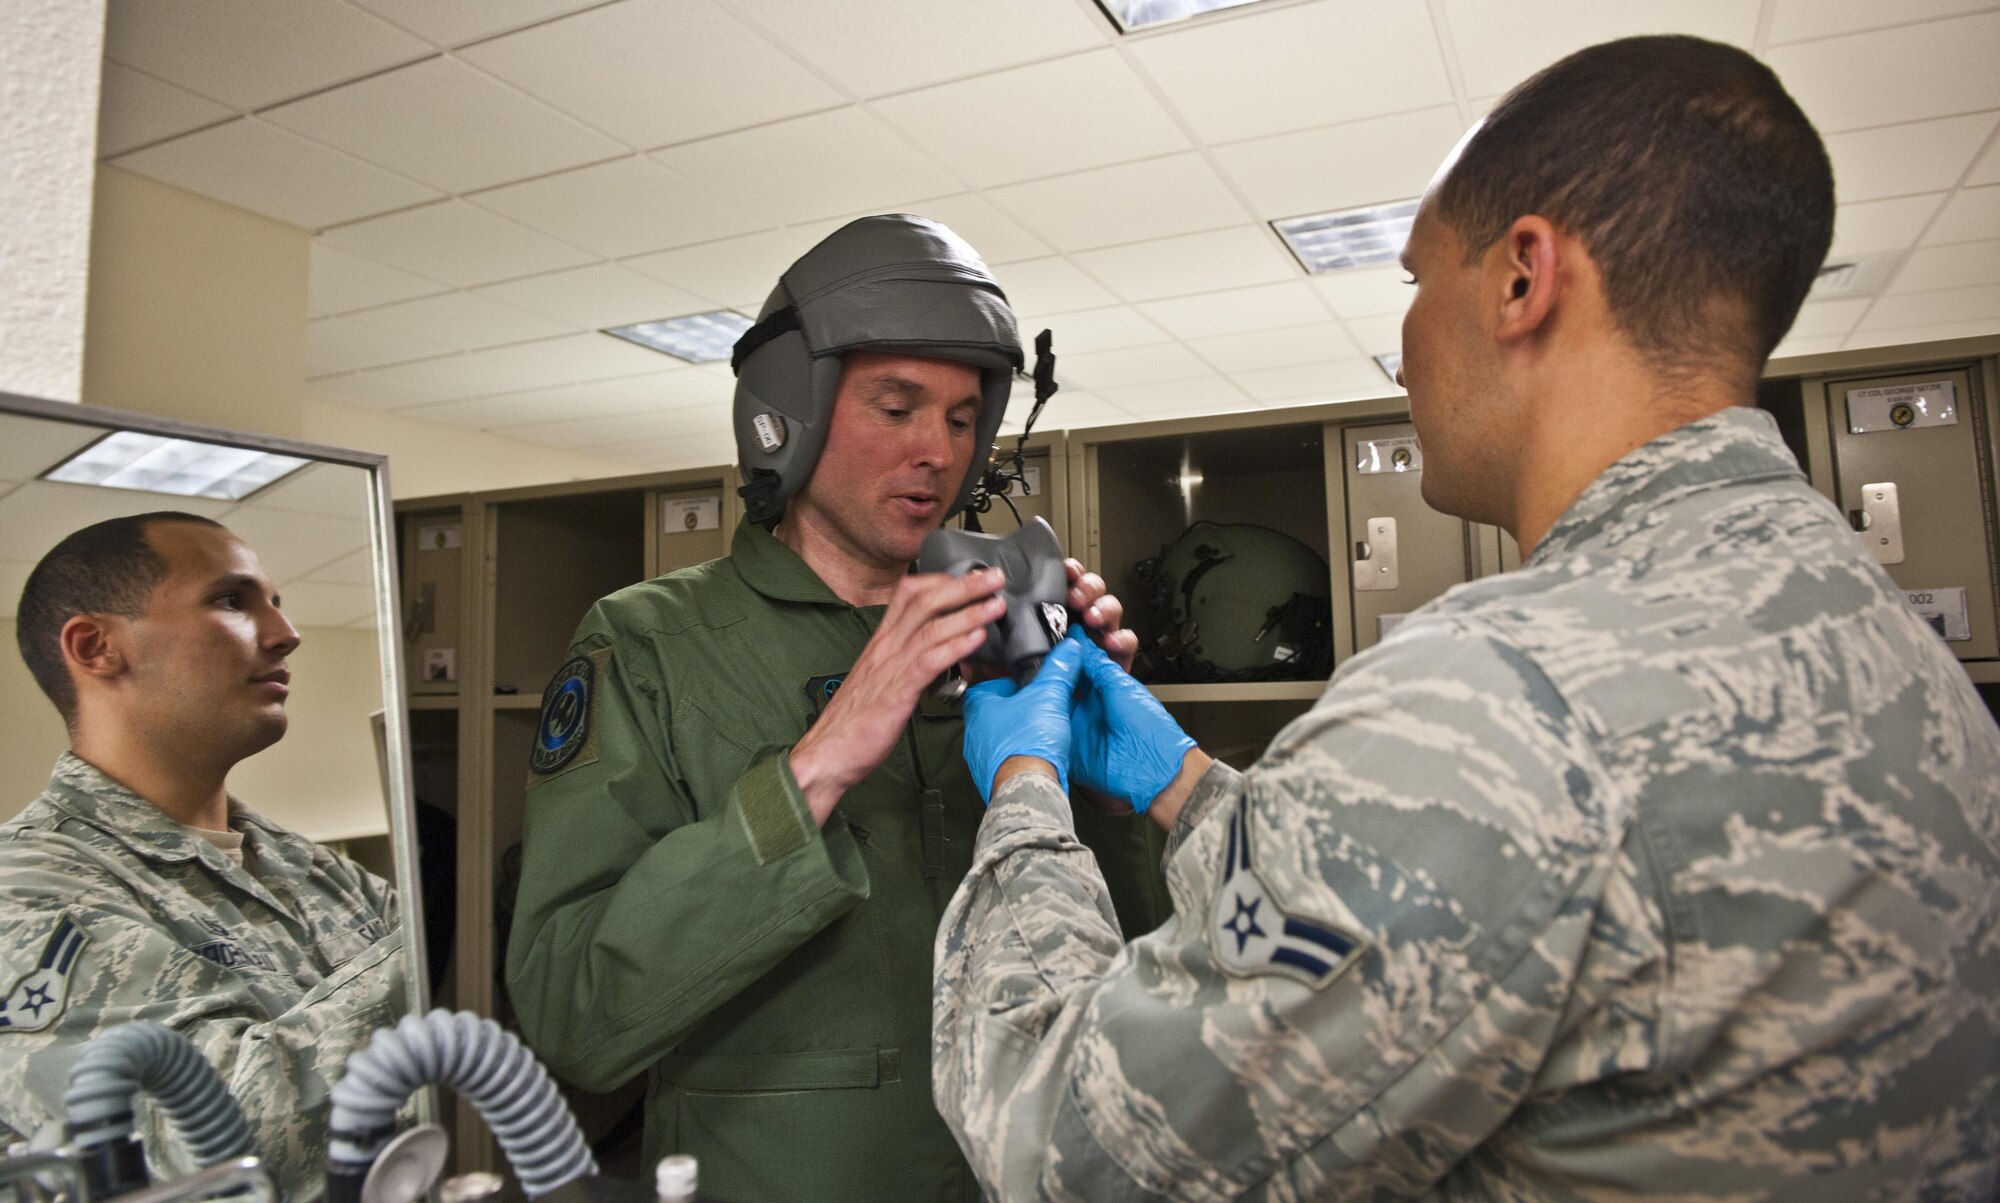 Airman 1st Class Michael Diaz, 4th Special Operations Squadron aircrew flight equipment technician, fits Acting Secretary of the Air Force Eric Fanning’s oxygen mask prior to flying on a CV-22 Osprey and AC-130U Spooky at Hurlburt Field Fla., Sept. 9, 2013. The visit is part of Fanning’s familiarization with various Air Force missions since becoming the acting secretary. 
